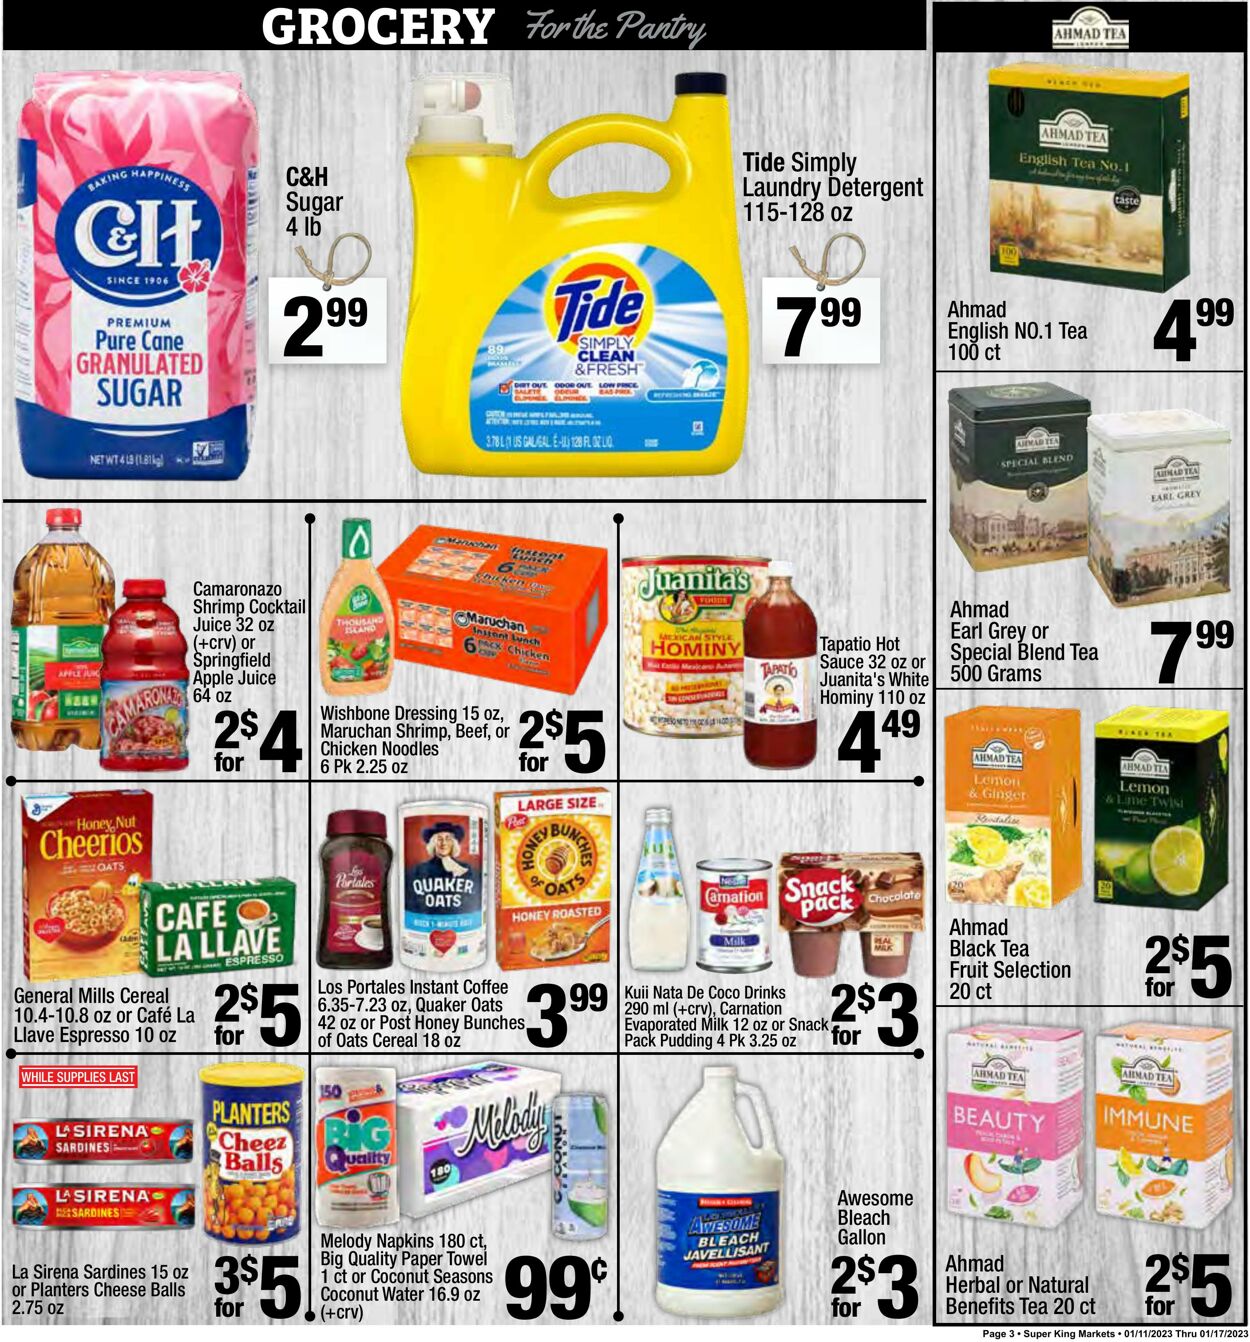 Weekly ad Super King Markets 01/11/2023 - 01/17/2023